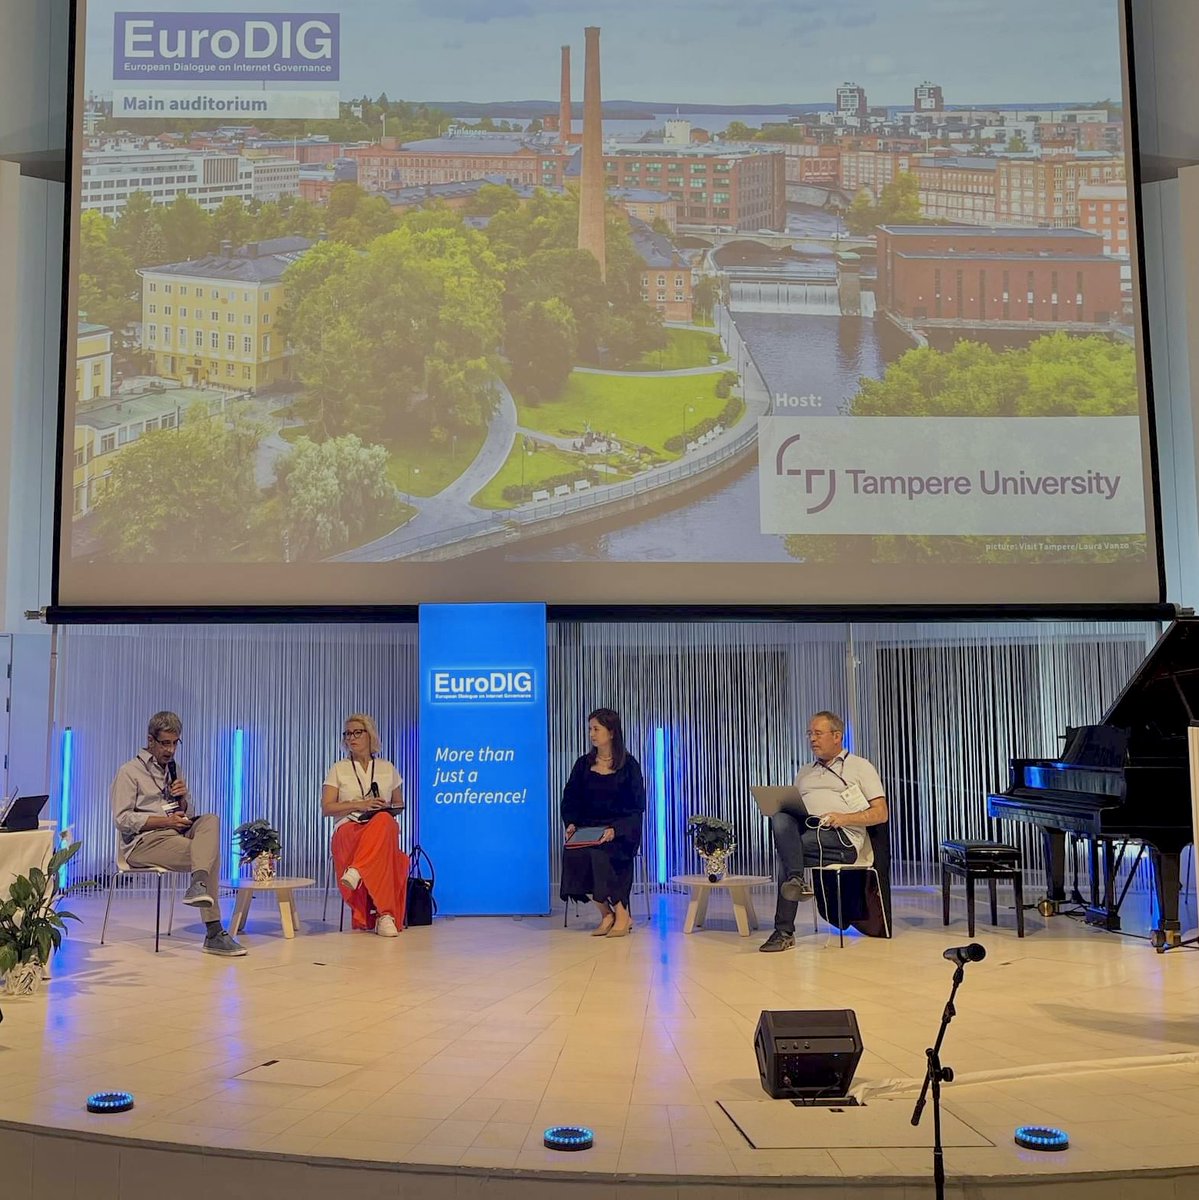 Today our team member, @DusanStojicevic, moderated a session at @EuroDIG on the relationship between internet and geopolitics of war. We discussed challenges of maintaining internet neutrality in chaos and were honored to have key participants share their insights. #EuroDIG2023